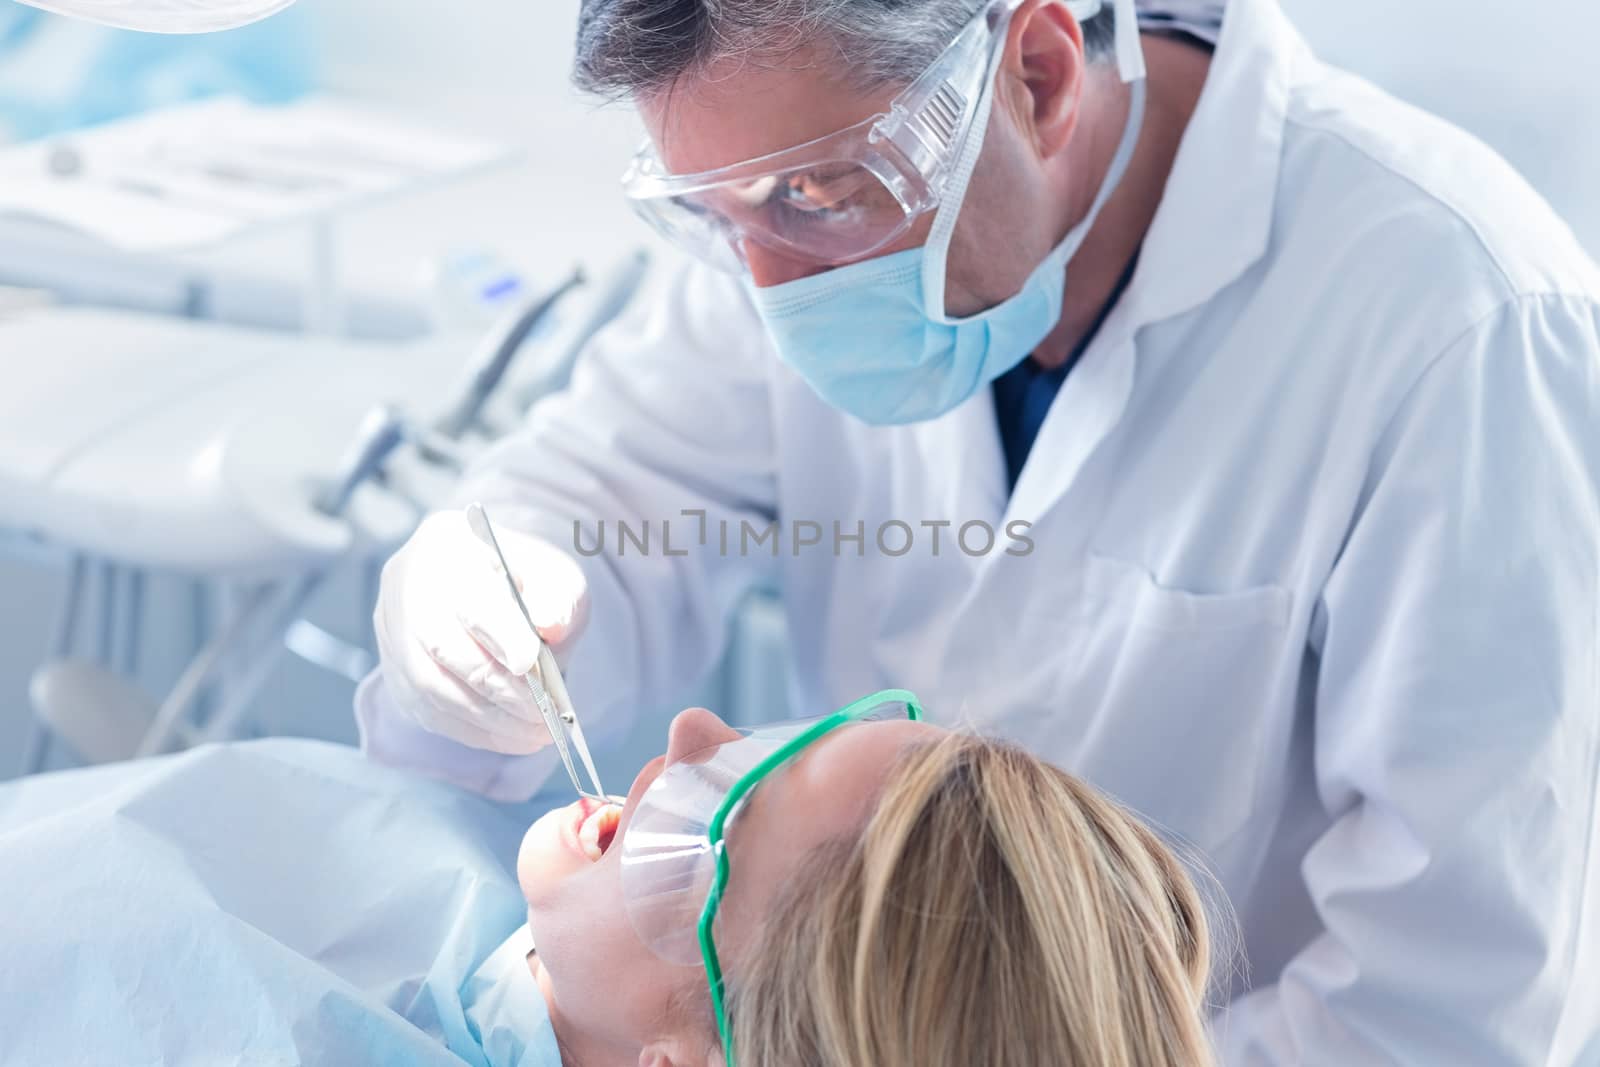 Dentist examining a patients teeth with surgical mask and gloves by Wavebreakmedia